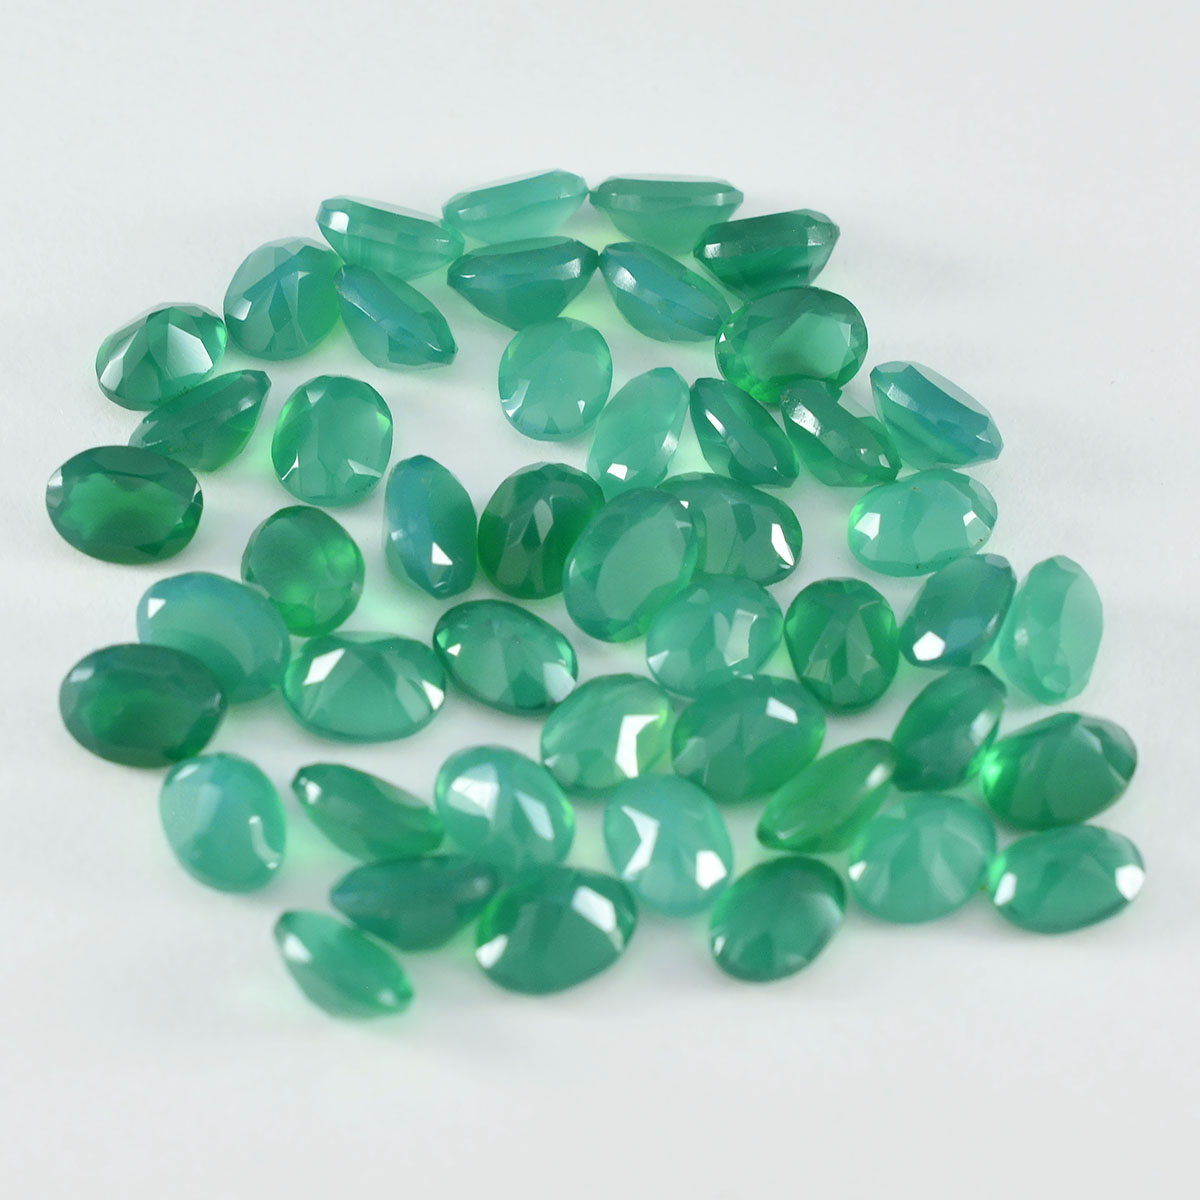 Riyogems 1PC Real Green Onyx Faceted 3x5 mm Oval Shape excellent Quality Loose Gem